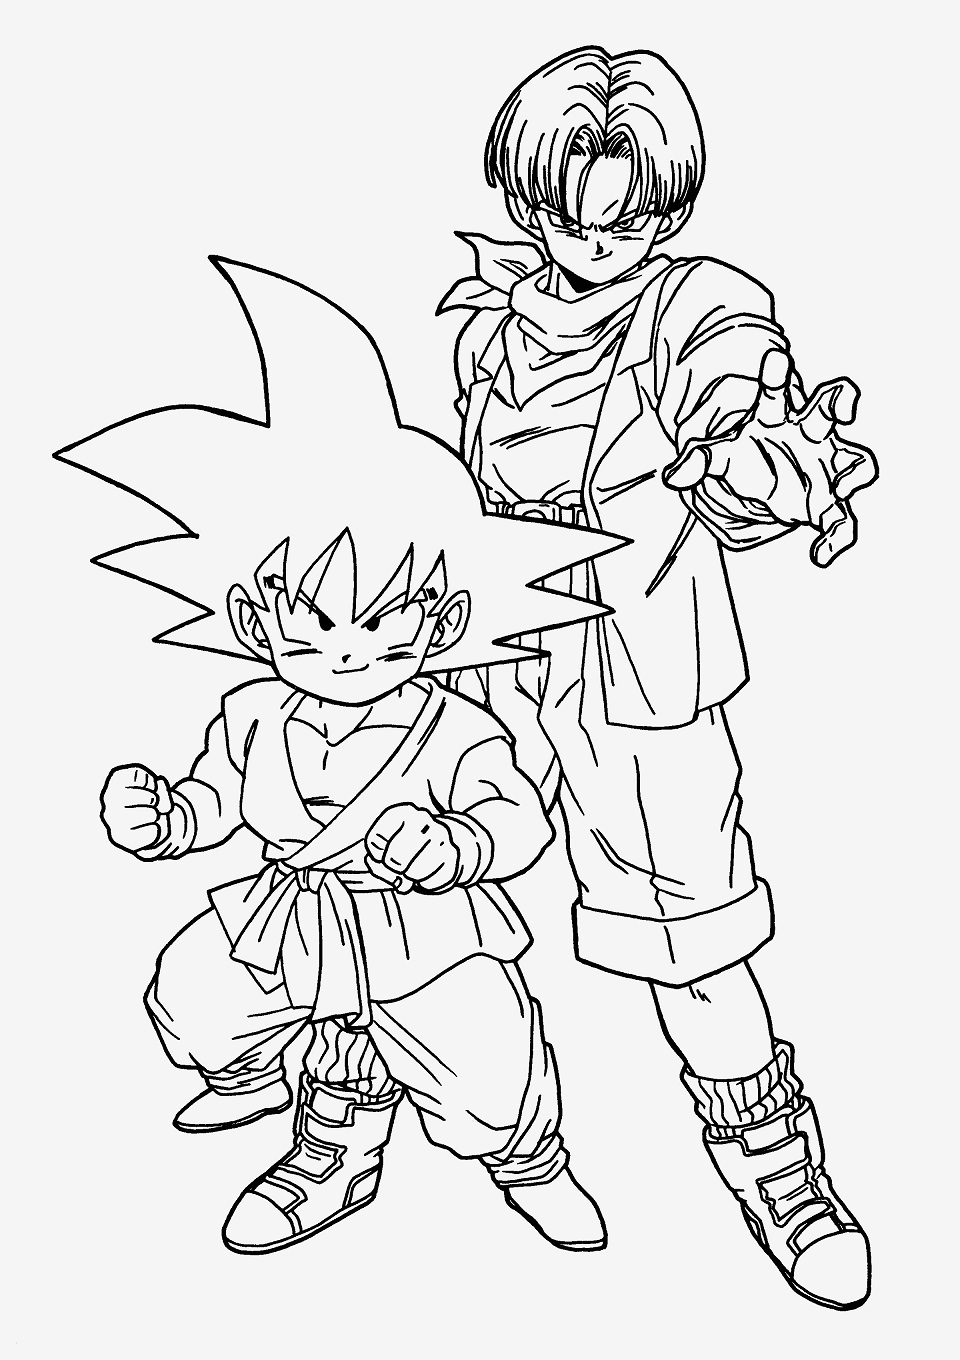 Cool Goten And Trunks Coloring Page   Free Printable Coloring ...